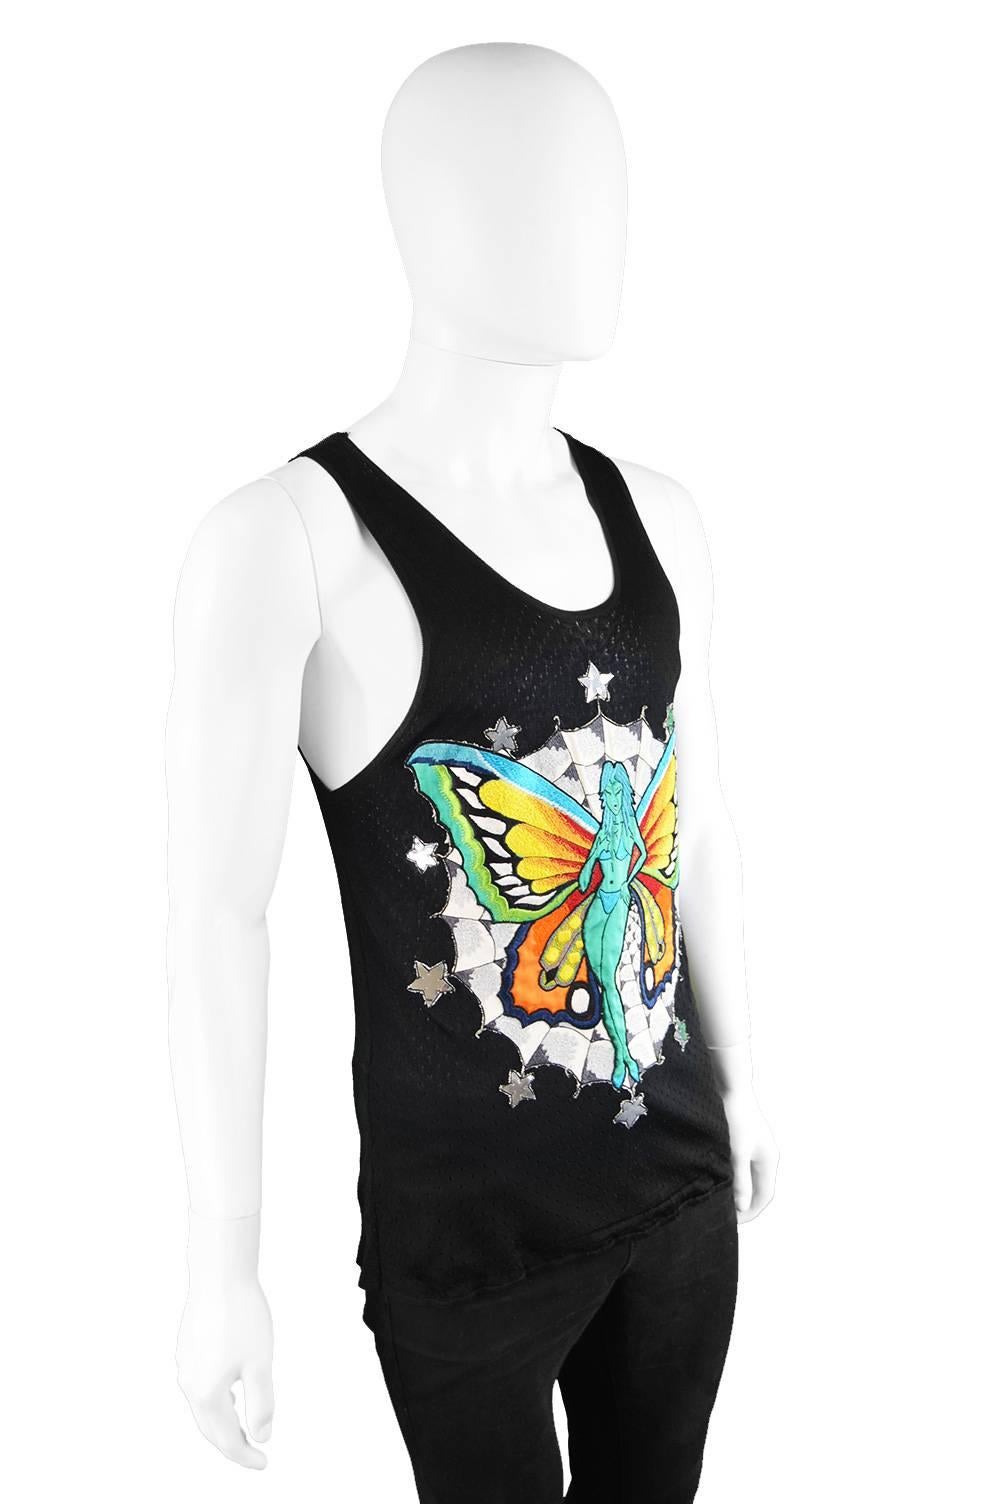 Men's Tom Ford for Gucci Mens Rayon Knit Tank Top with Embroidered Fairy, S/S 2002  For Sale